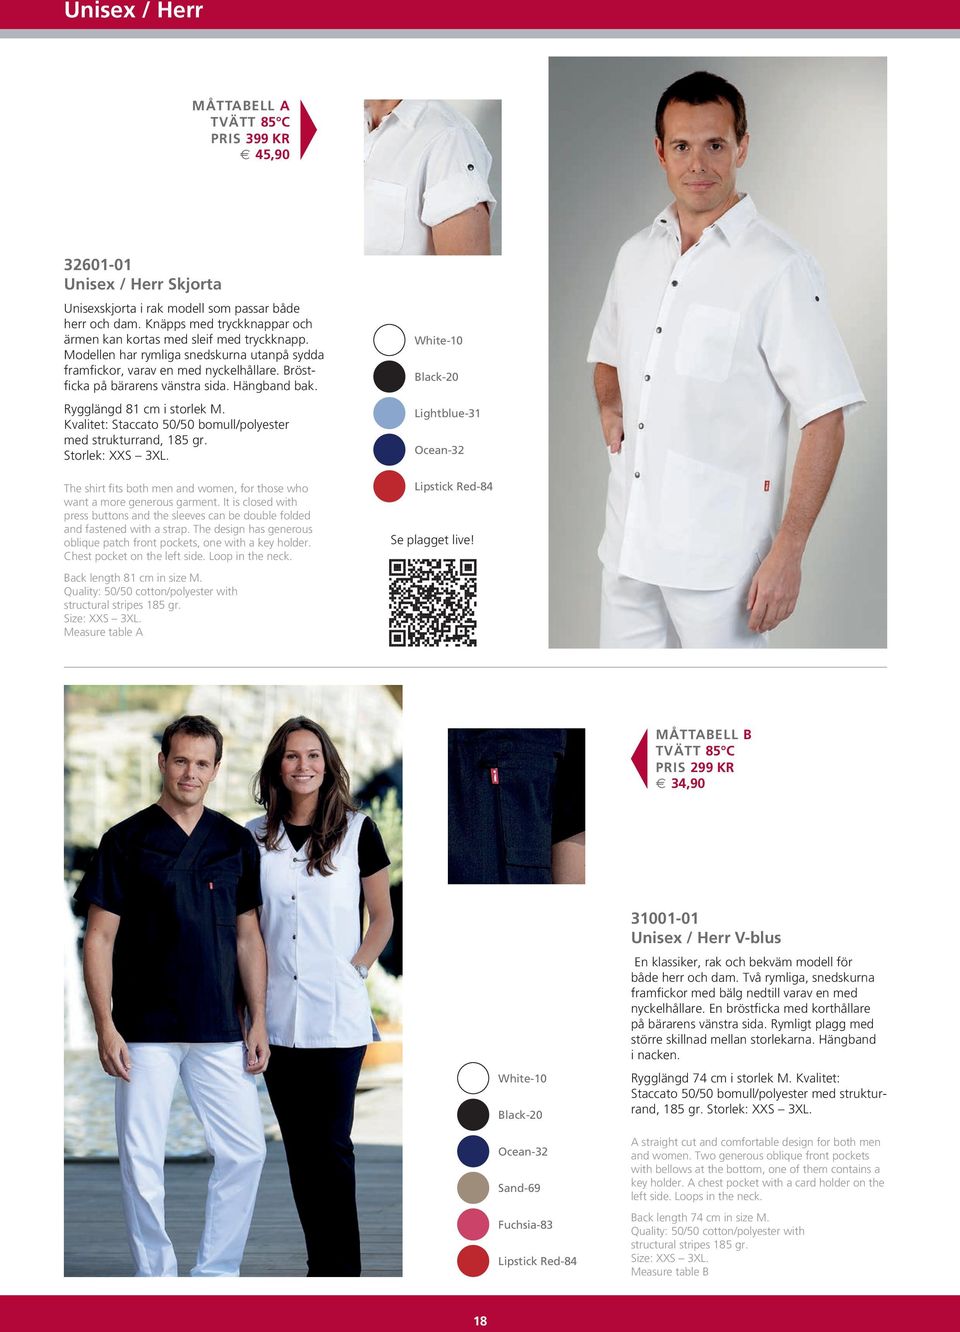 Kvalitet: Staccato 50/50 bomull/polyester med strukturrand, 185 gr. Storlek: XXS 3XL. The shirt fits both men and women, for those who want a more generous garment.